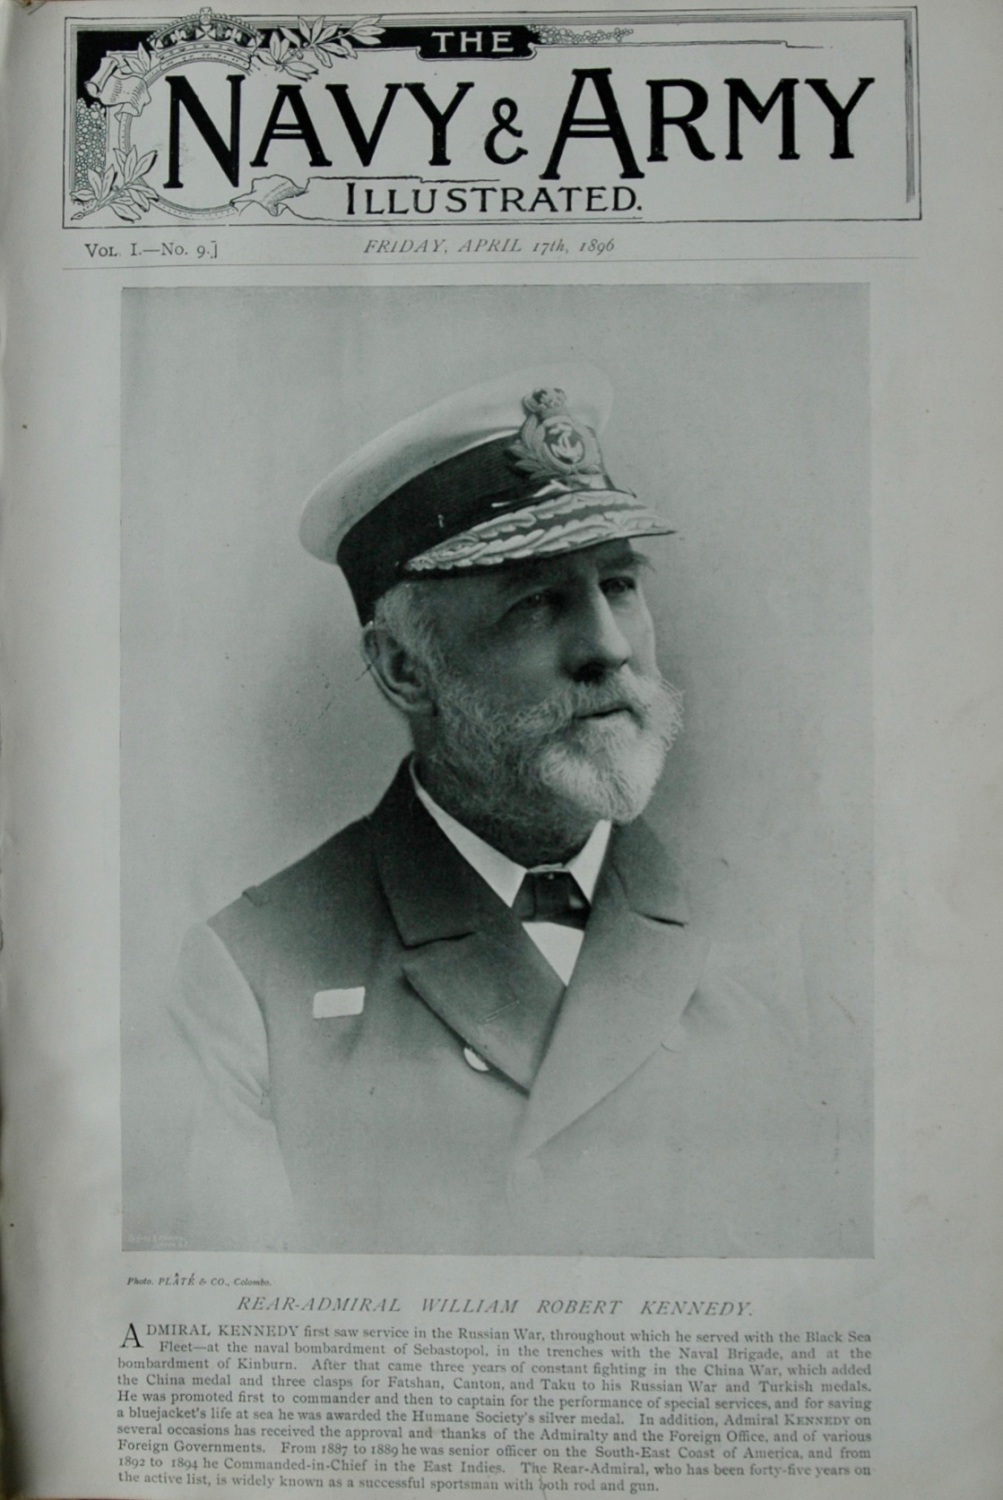 Original Full copy of Navy & Army Illustrated, April 17th, 1896